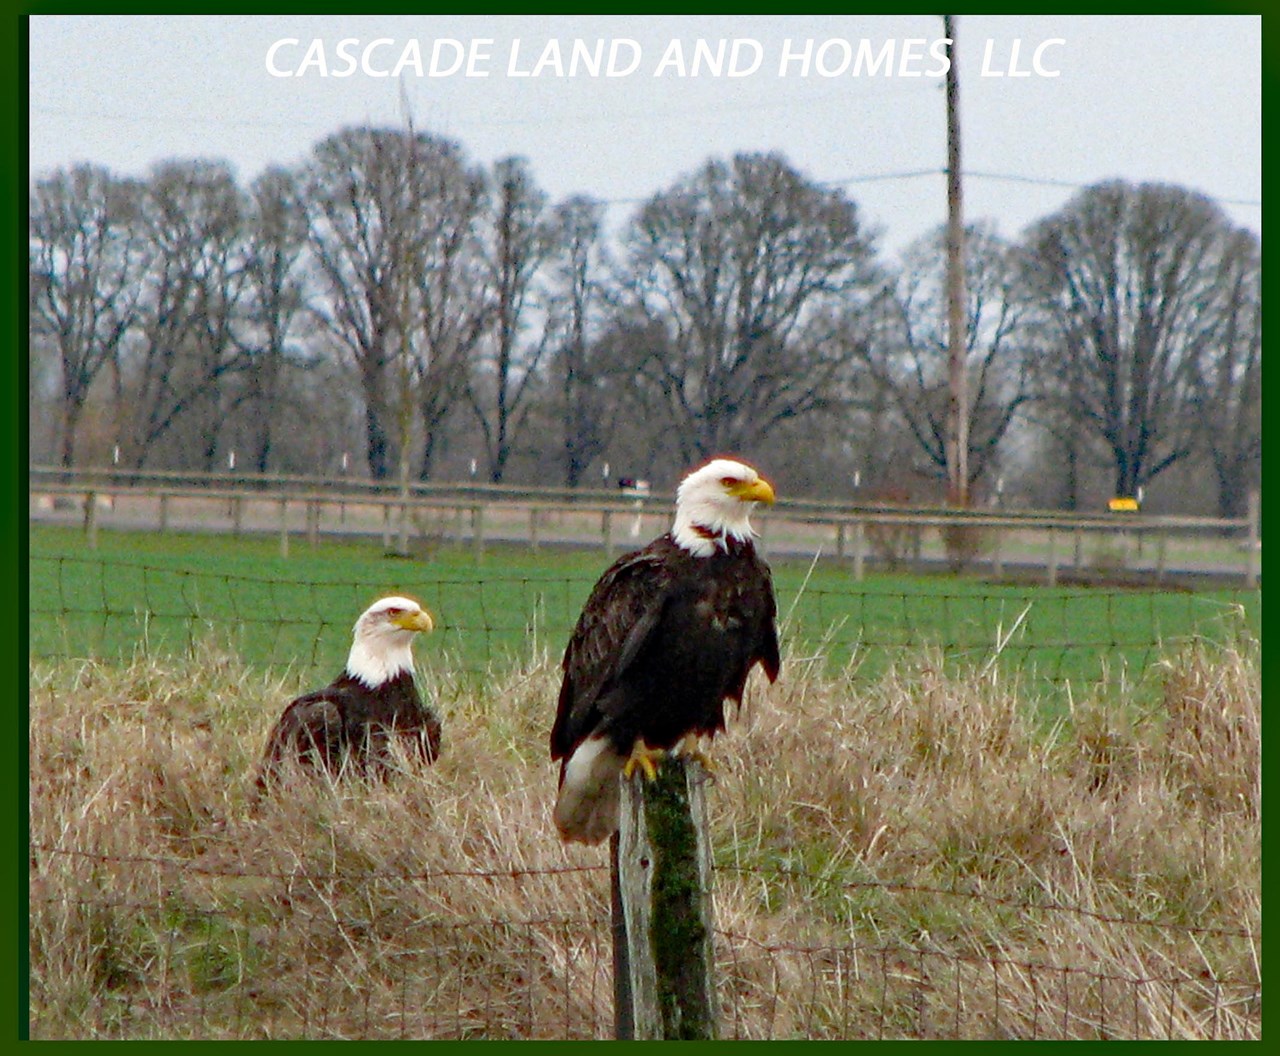 the klamath basin is on the pacific flyway for migratory birds and sees over 300 species of birds come through the area, including ducks, geese, sandhill cranes, songbirds, hawks, osprey, and even pelicans! the klamath basin has the largest congregation of wintering bald eagles in the lower 48 states!